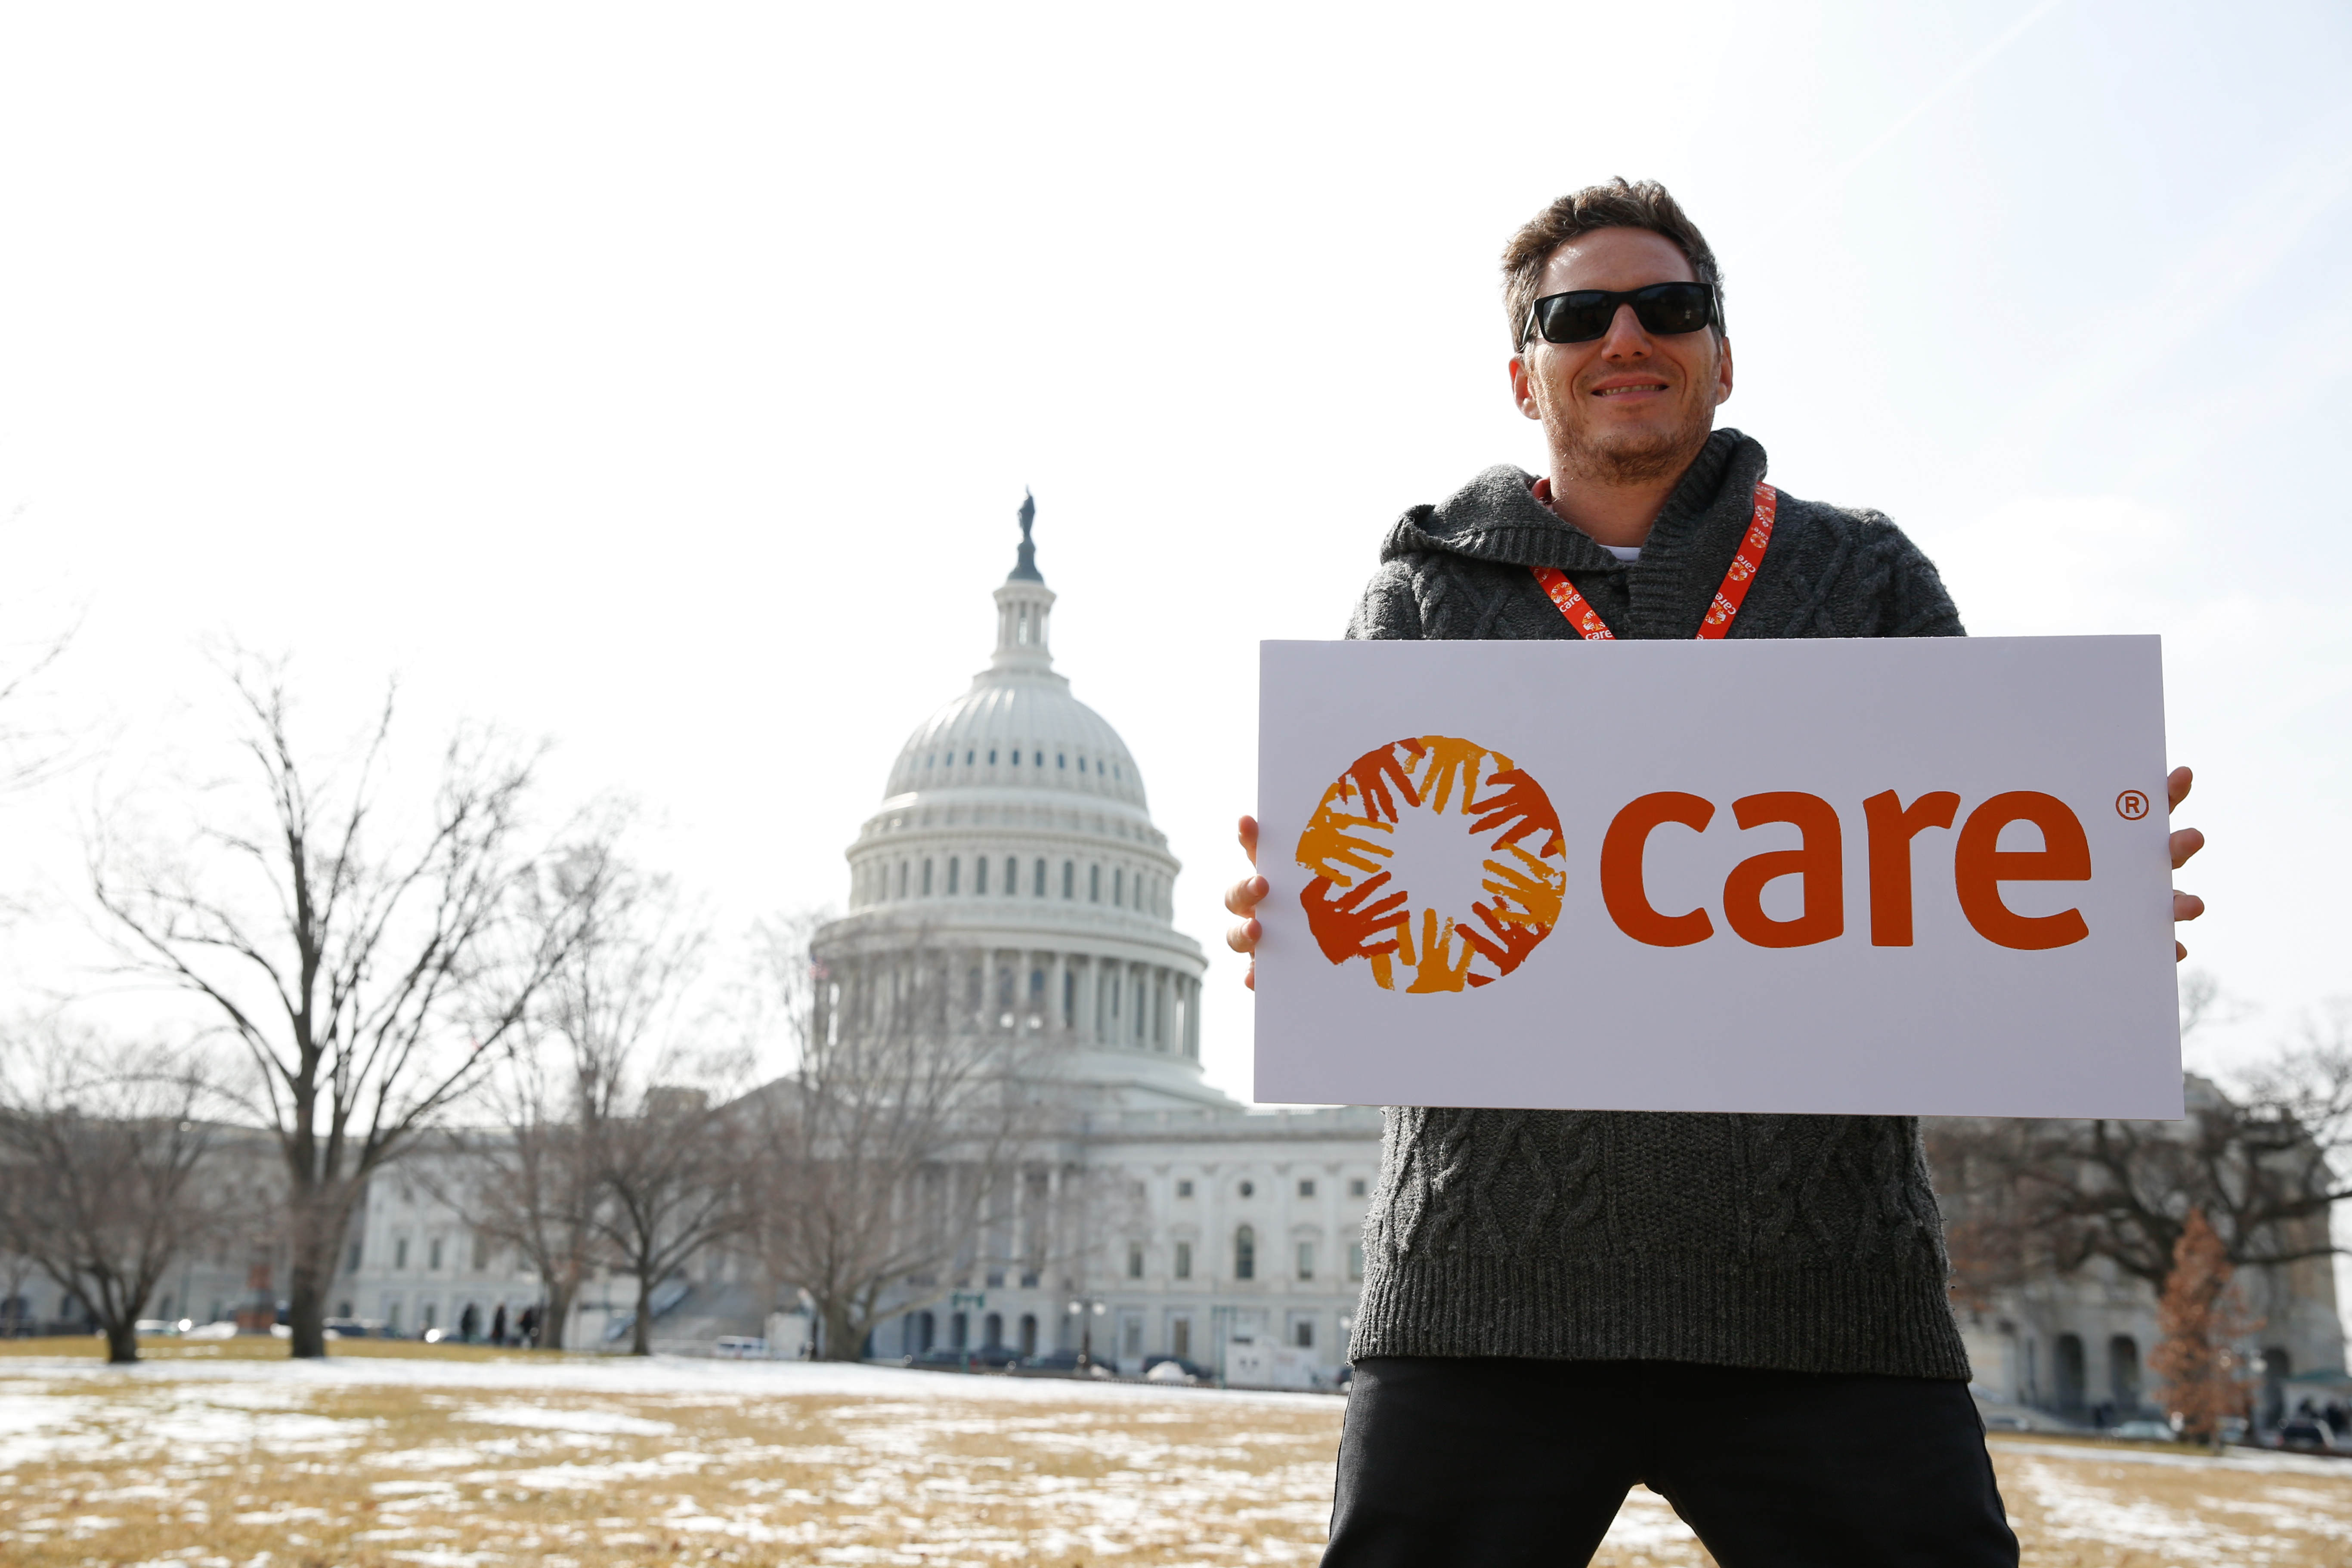 Spike Mendelsohn, chef, takes photos in front of the U.S. Capitol. CARE speakers, staff, board members and attendees of the 2014 CARE National Conference &amp; International Women&#039;s Day Celebration take pictures in front of the U.S. Capitol building, Washingt